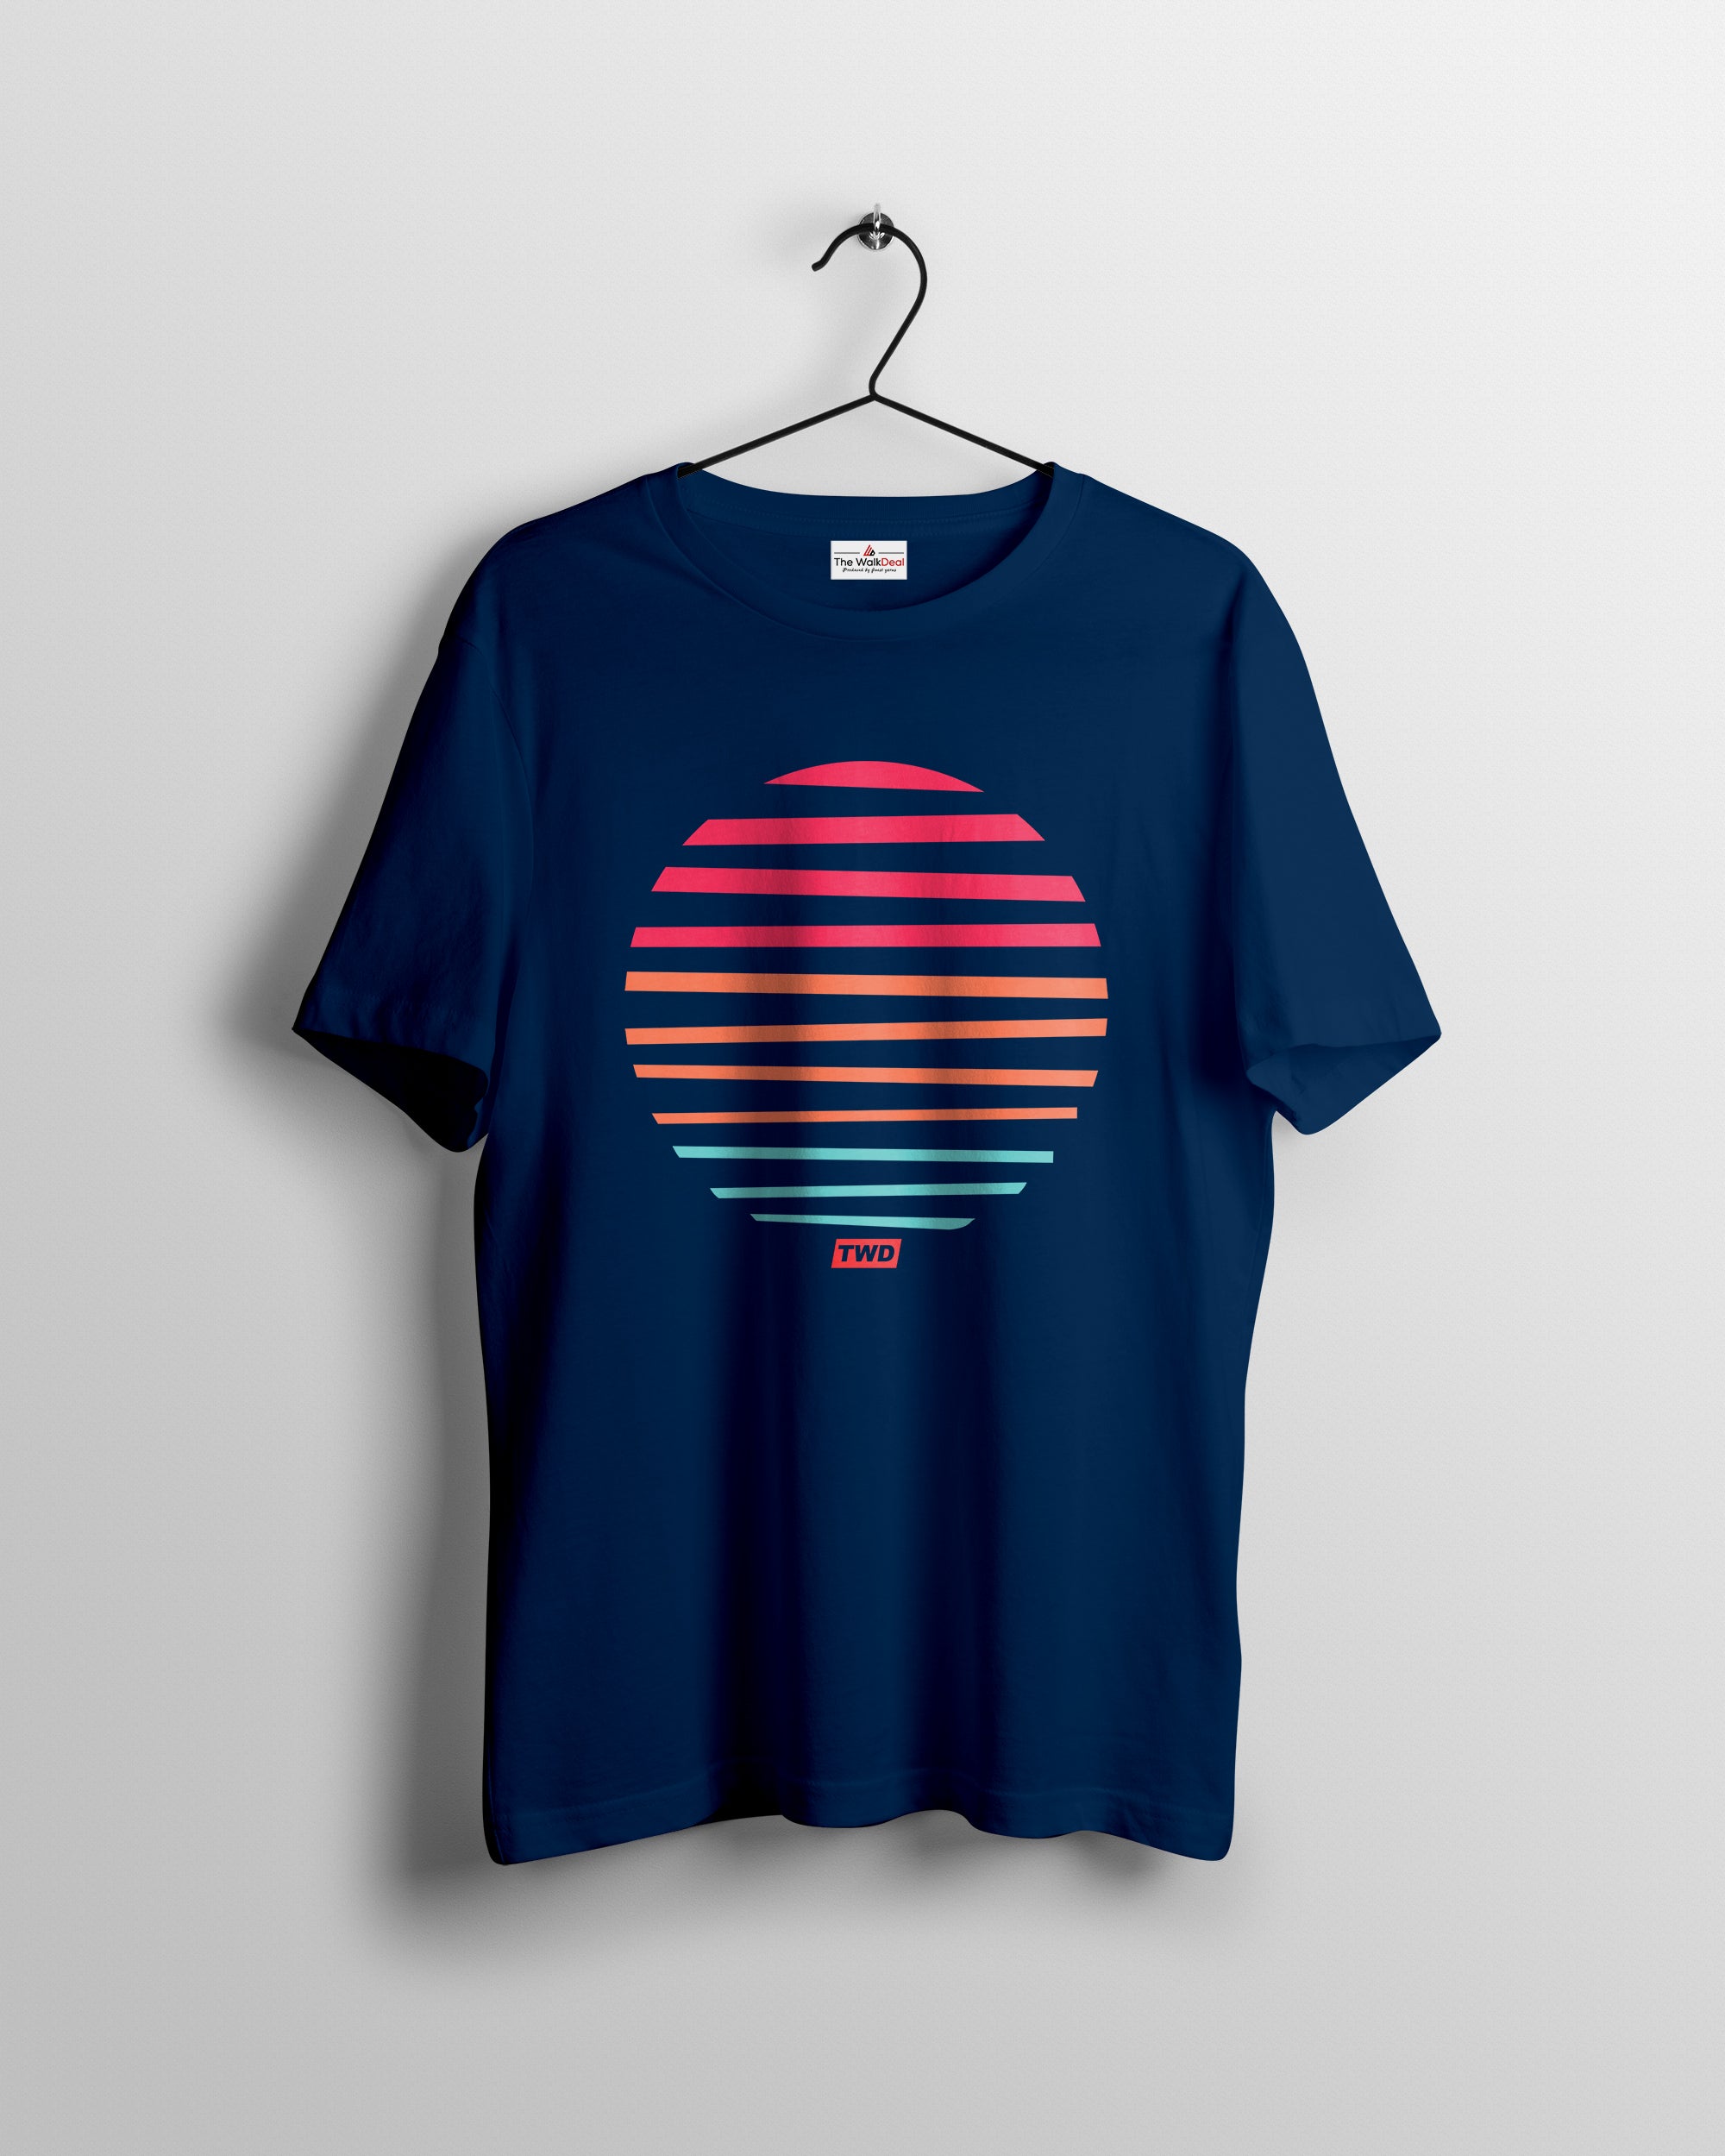 Shades Of Sun T-Shirts For Men || Navy Blue || Stylish Tshirts || 100% Cotton || Best T-Shirt For Men's